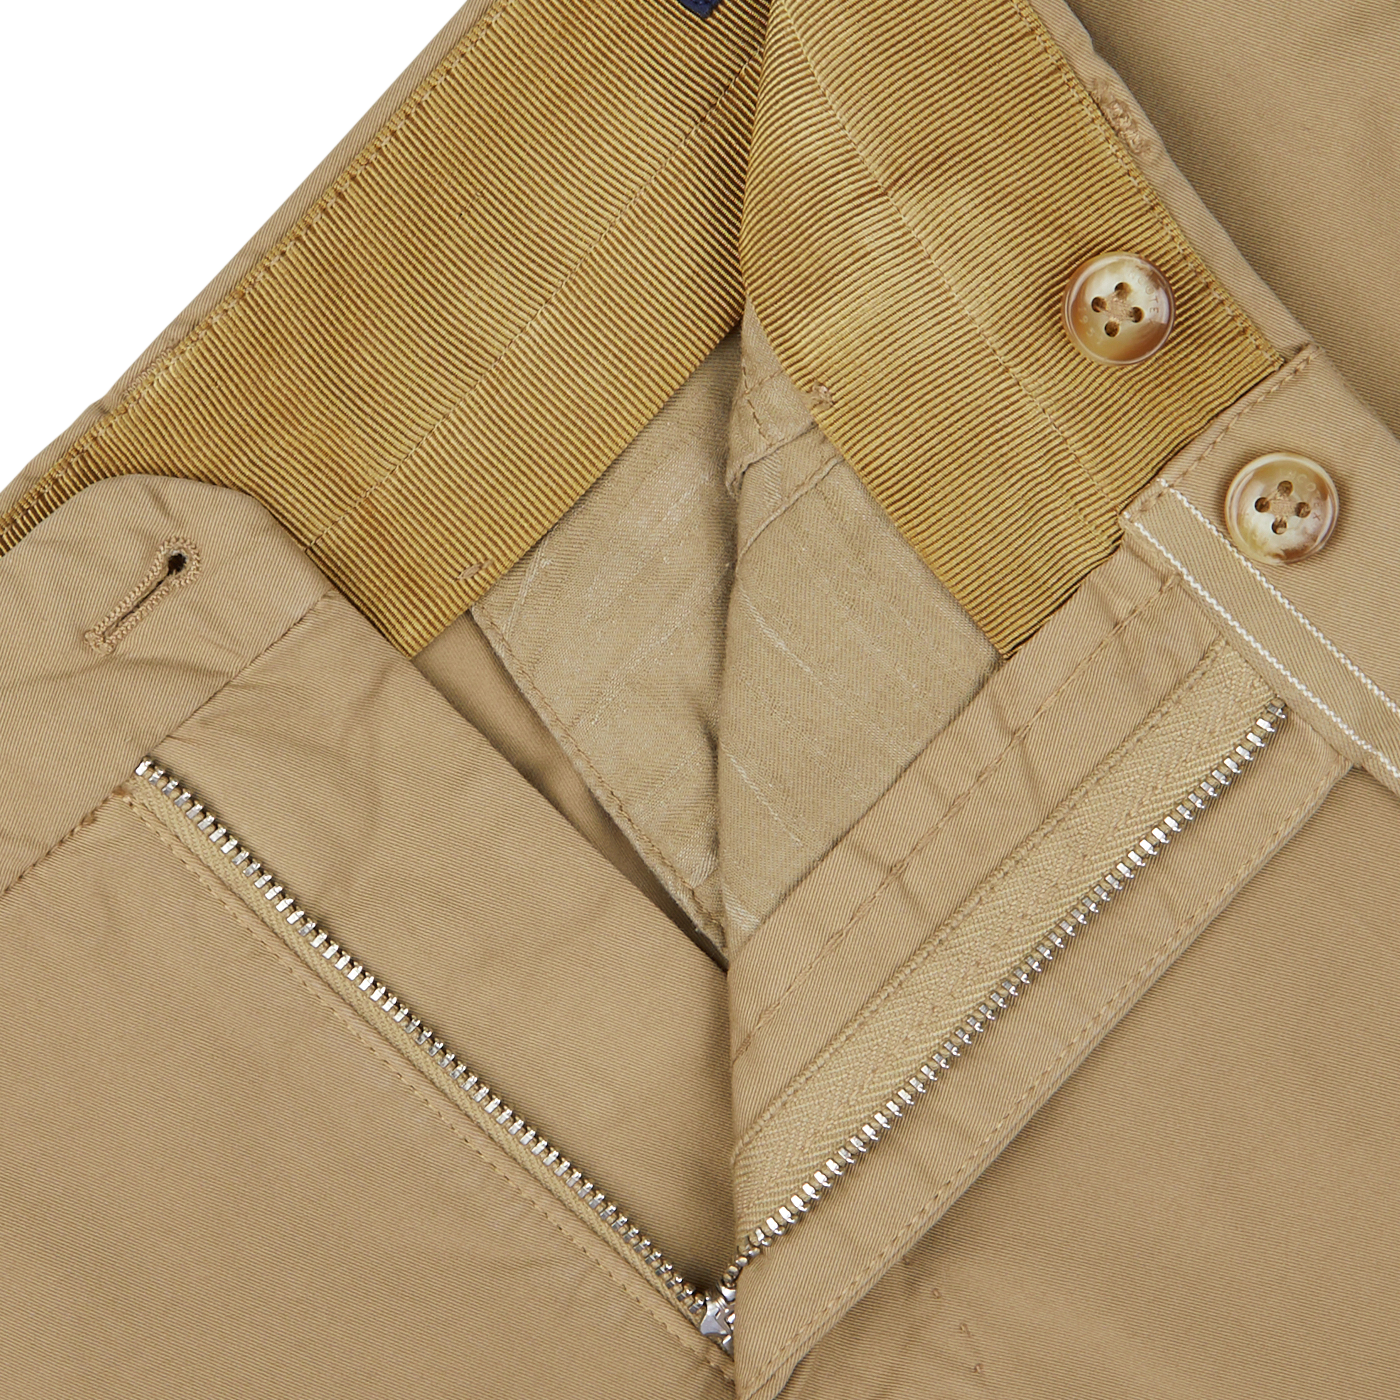 Beige jacket with zipper and button details, perfect with Royal Batavia Incotex Khaki Beige Cotton Stretch Regular Chinos.